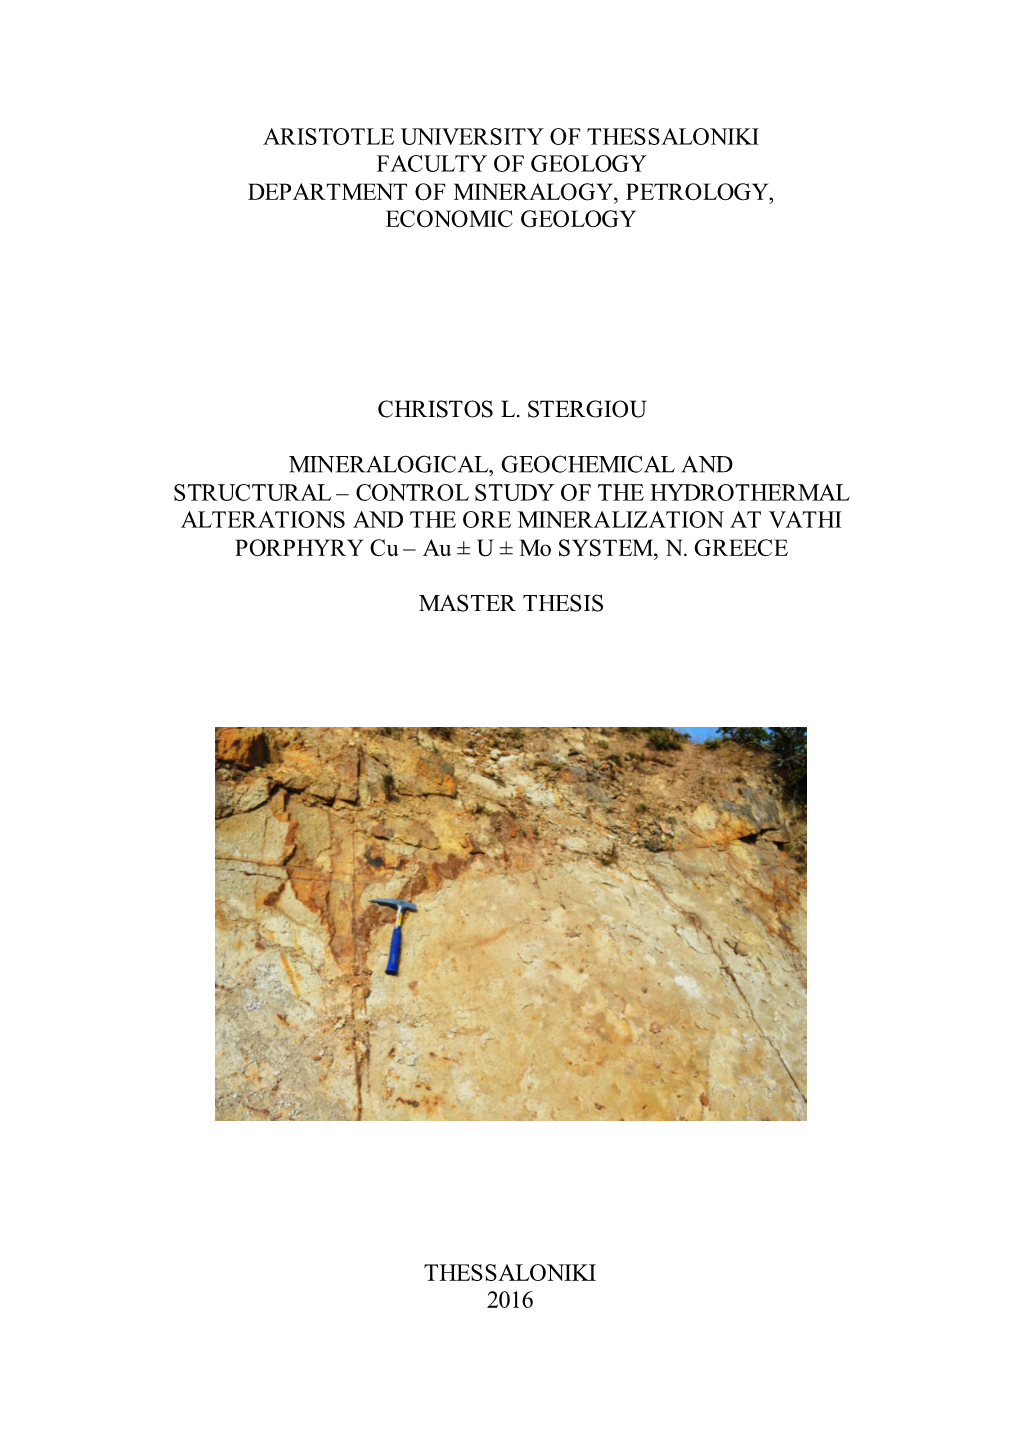 Aristotle University of Thessaloniki Faculty of Geology Department of Mineralogy, Petrology, Economic Geology Christos L. Sterg